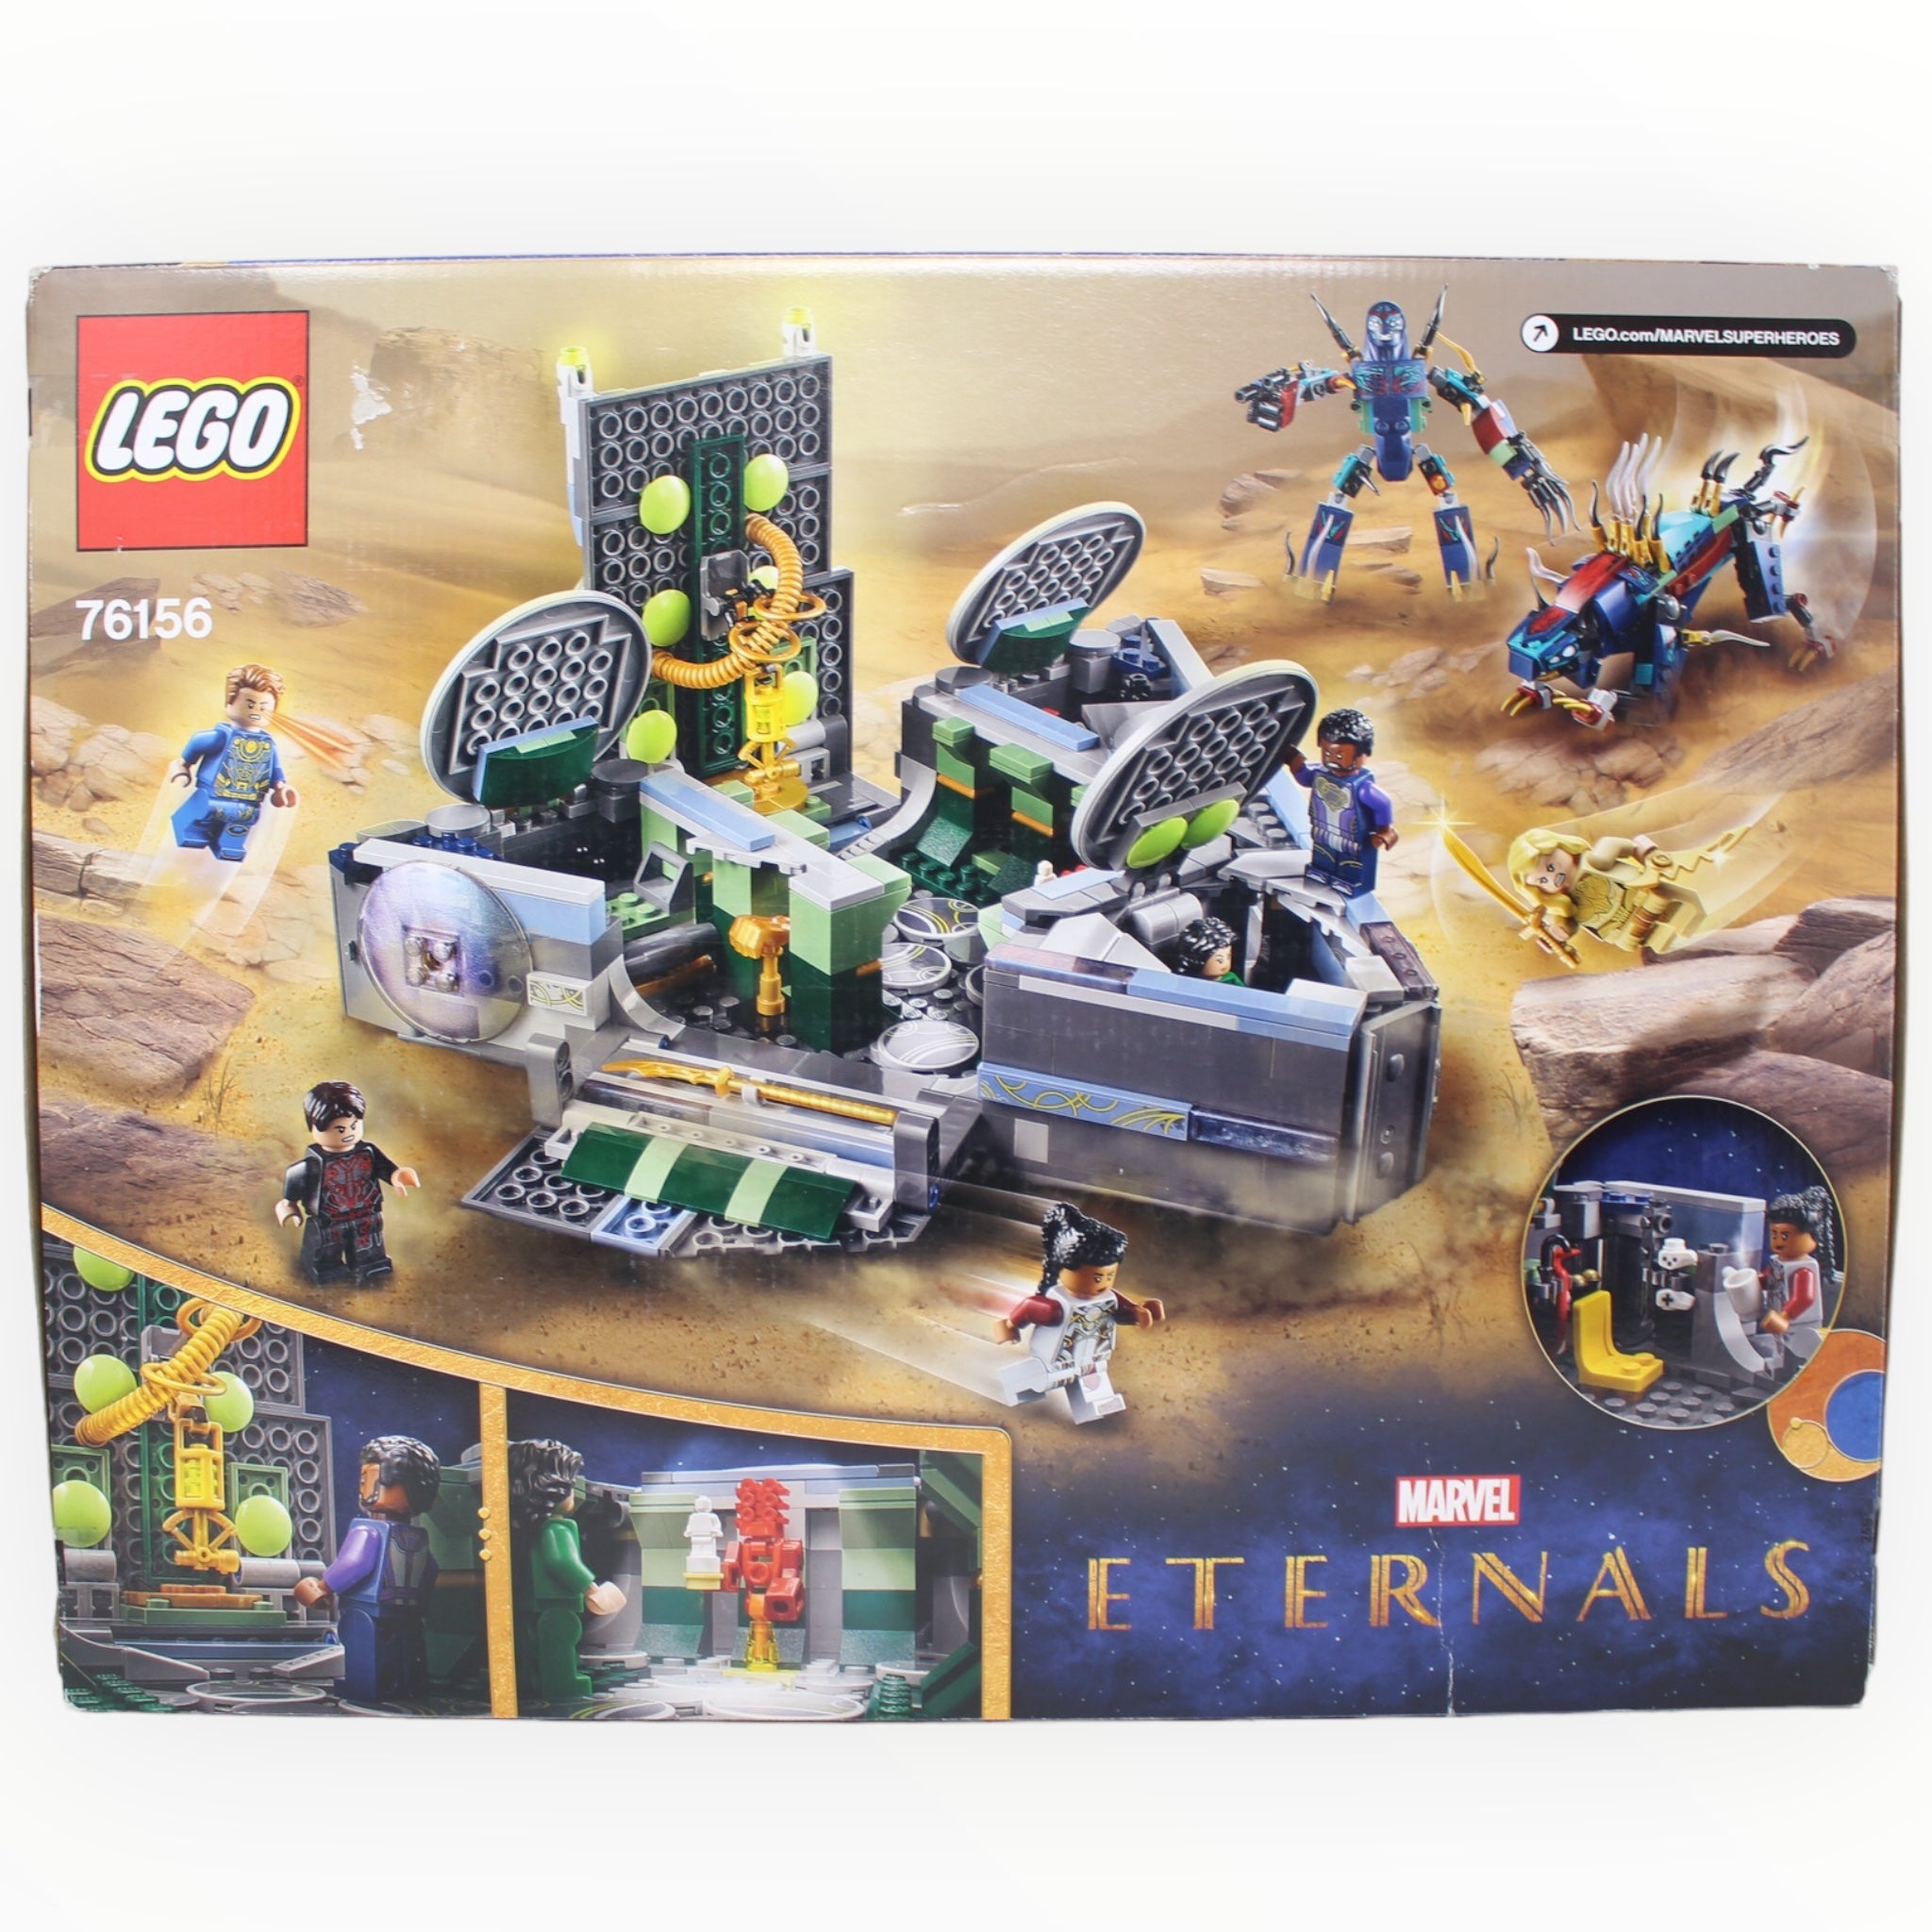 Retired Set 76156 Eternals Rise of the Domo